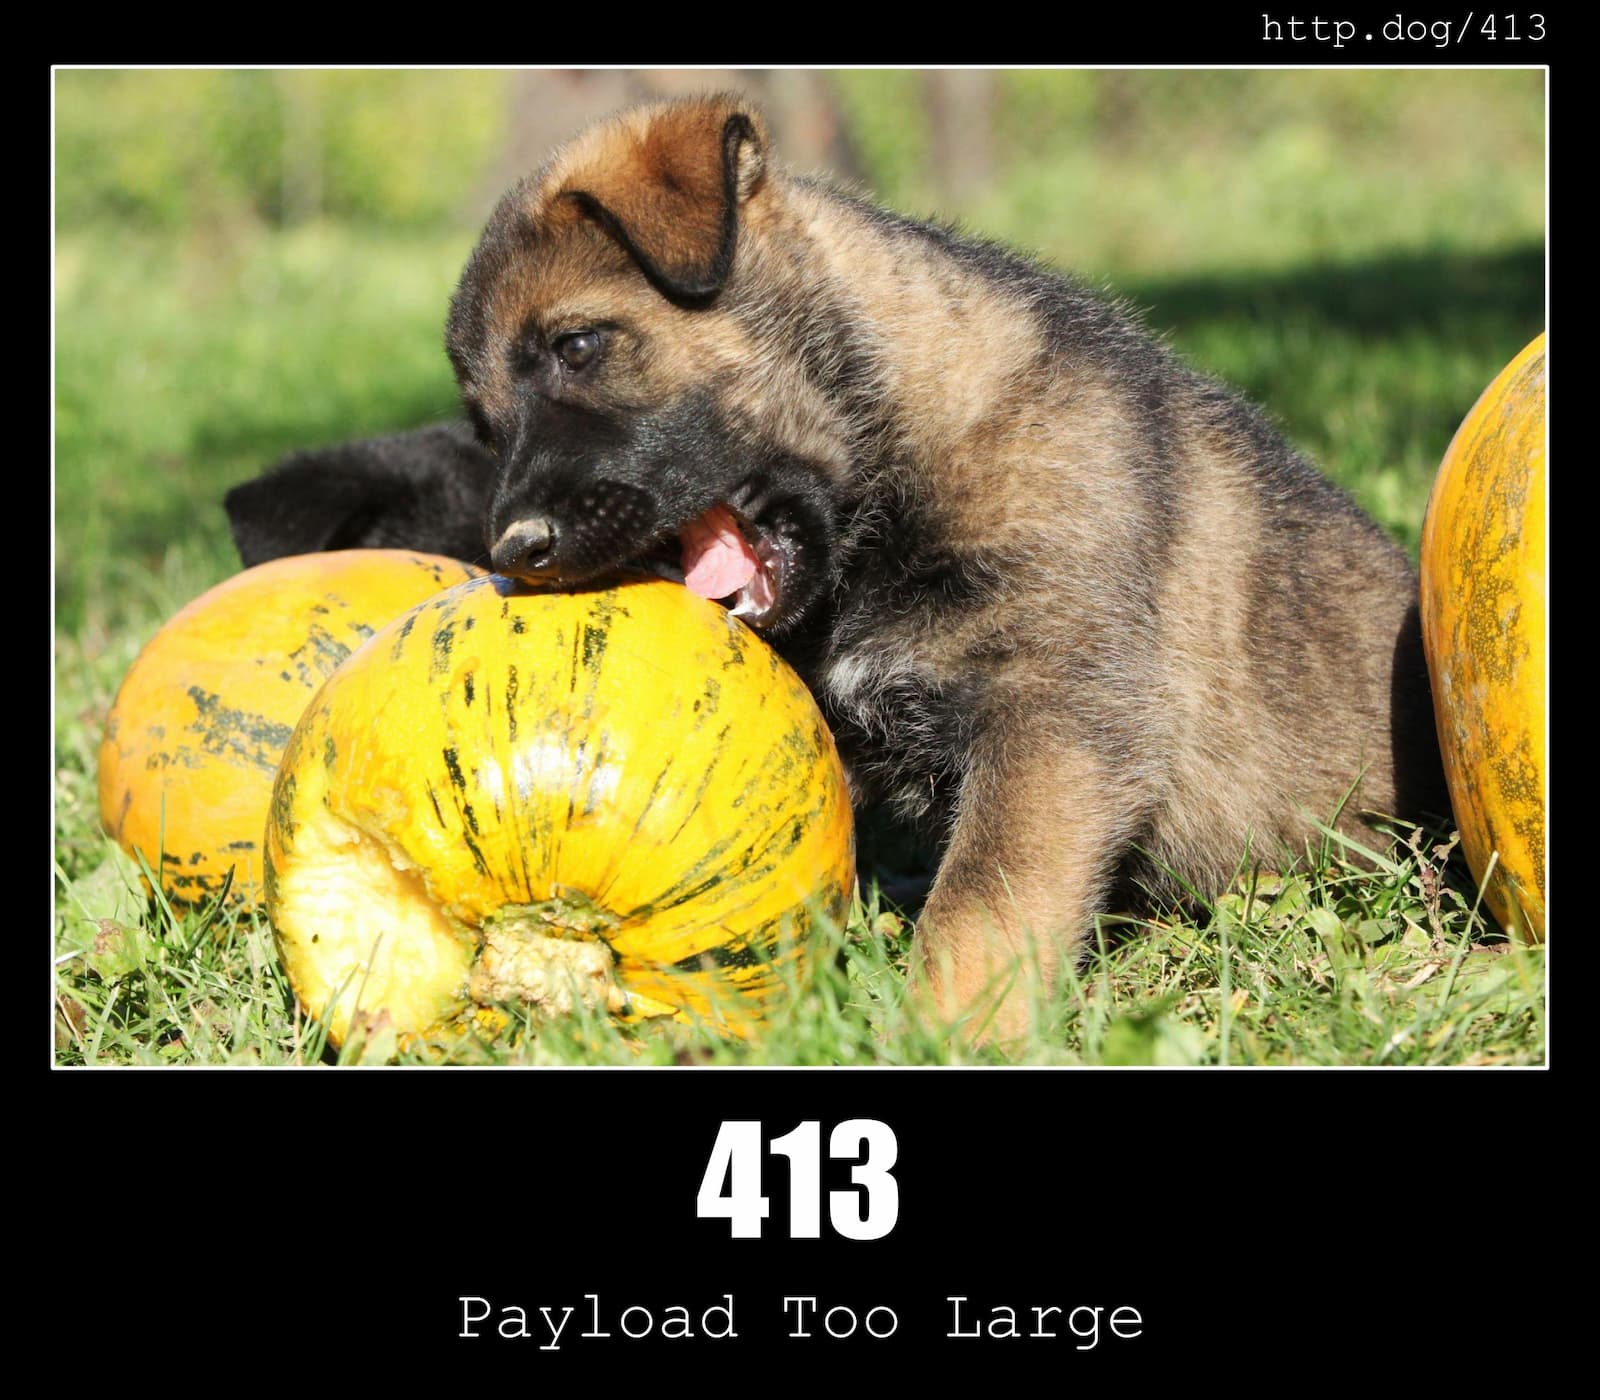 HTTP Status Code 413 Payload Too Large & Dogs